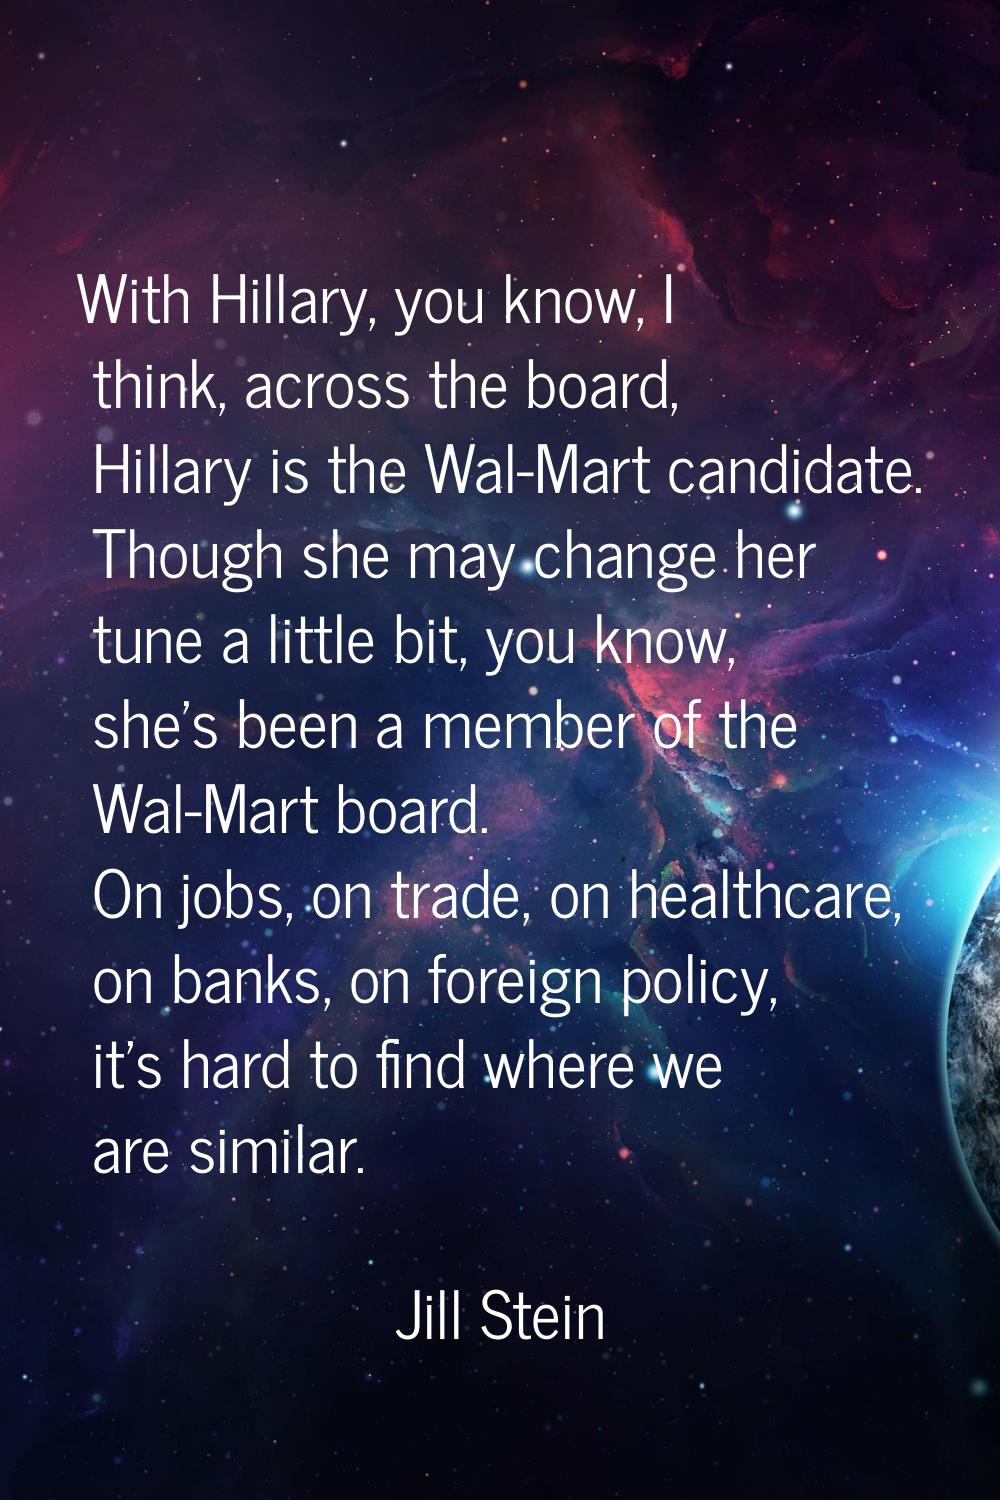 With Hillary, you know, I think, across the board, Hillary is the Wal-Mart candidate. Though she ma